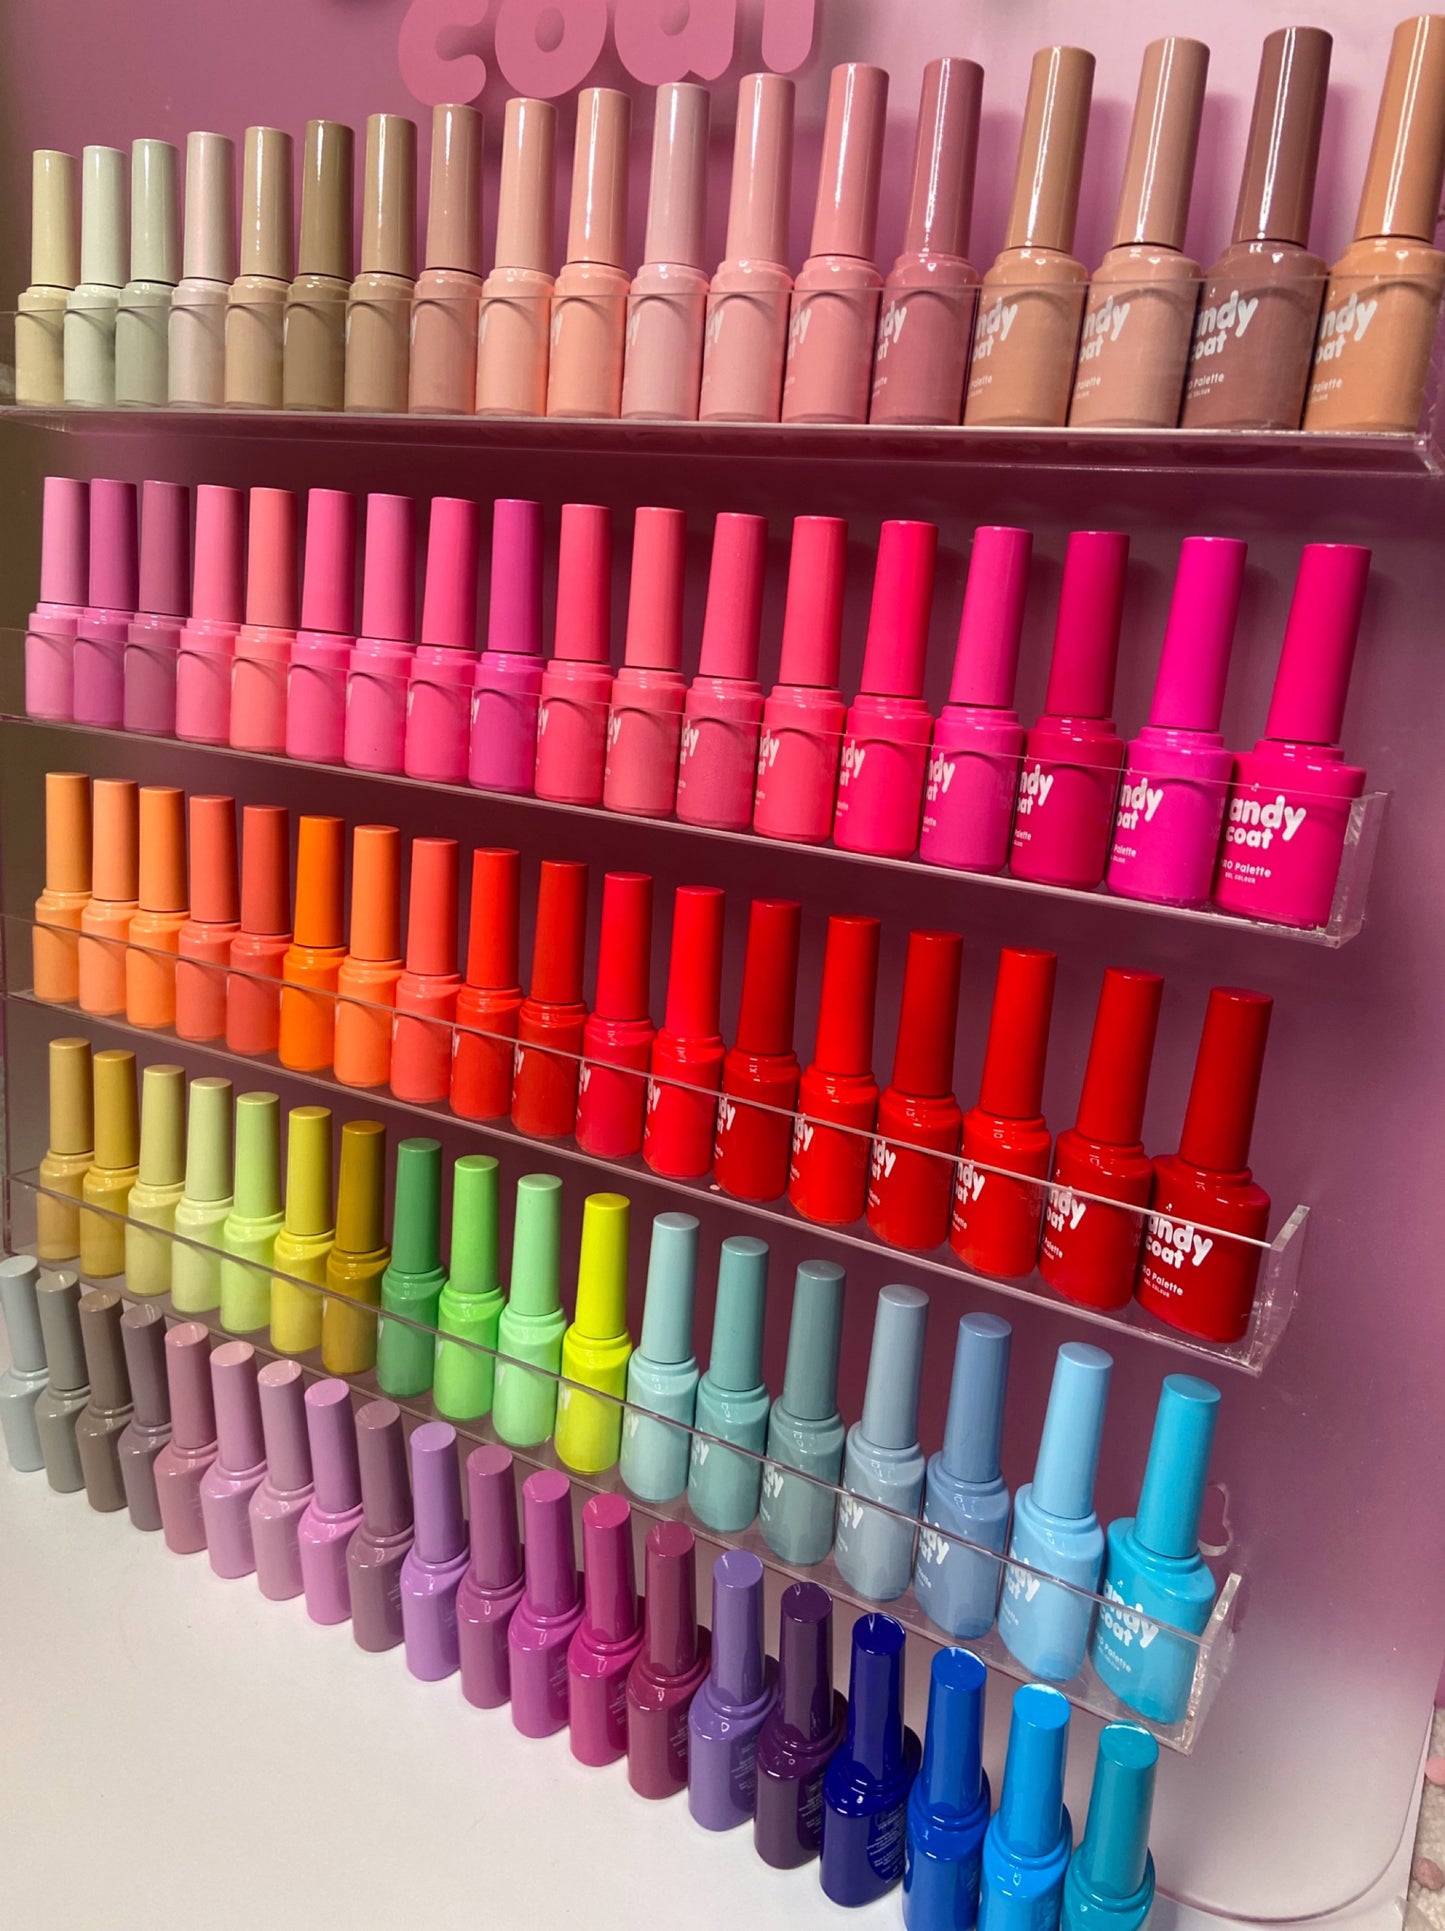 Candy Coat PRO Palette - Hema Free Gel Polish Full Collection - Wall of Dreams - Candy Coat